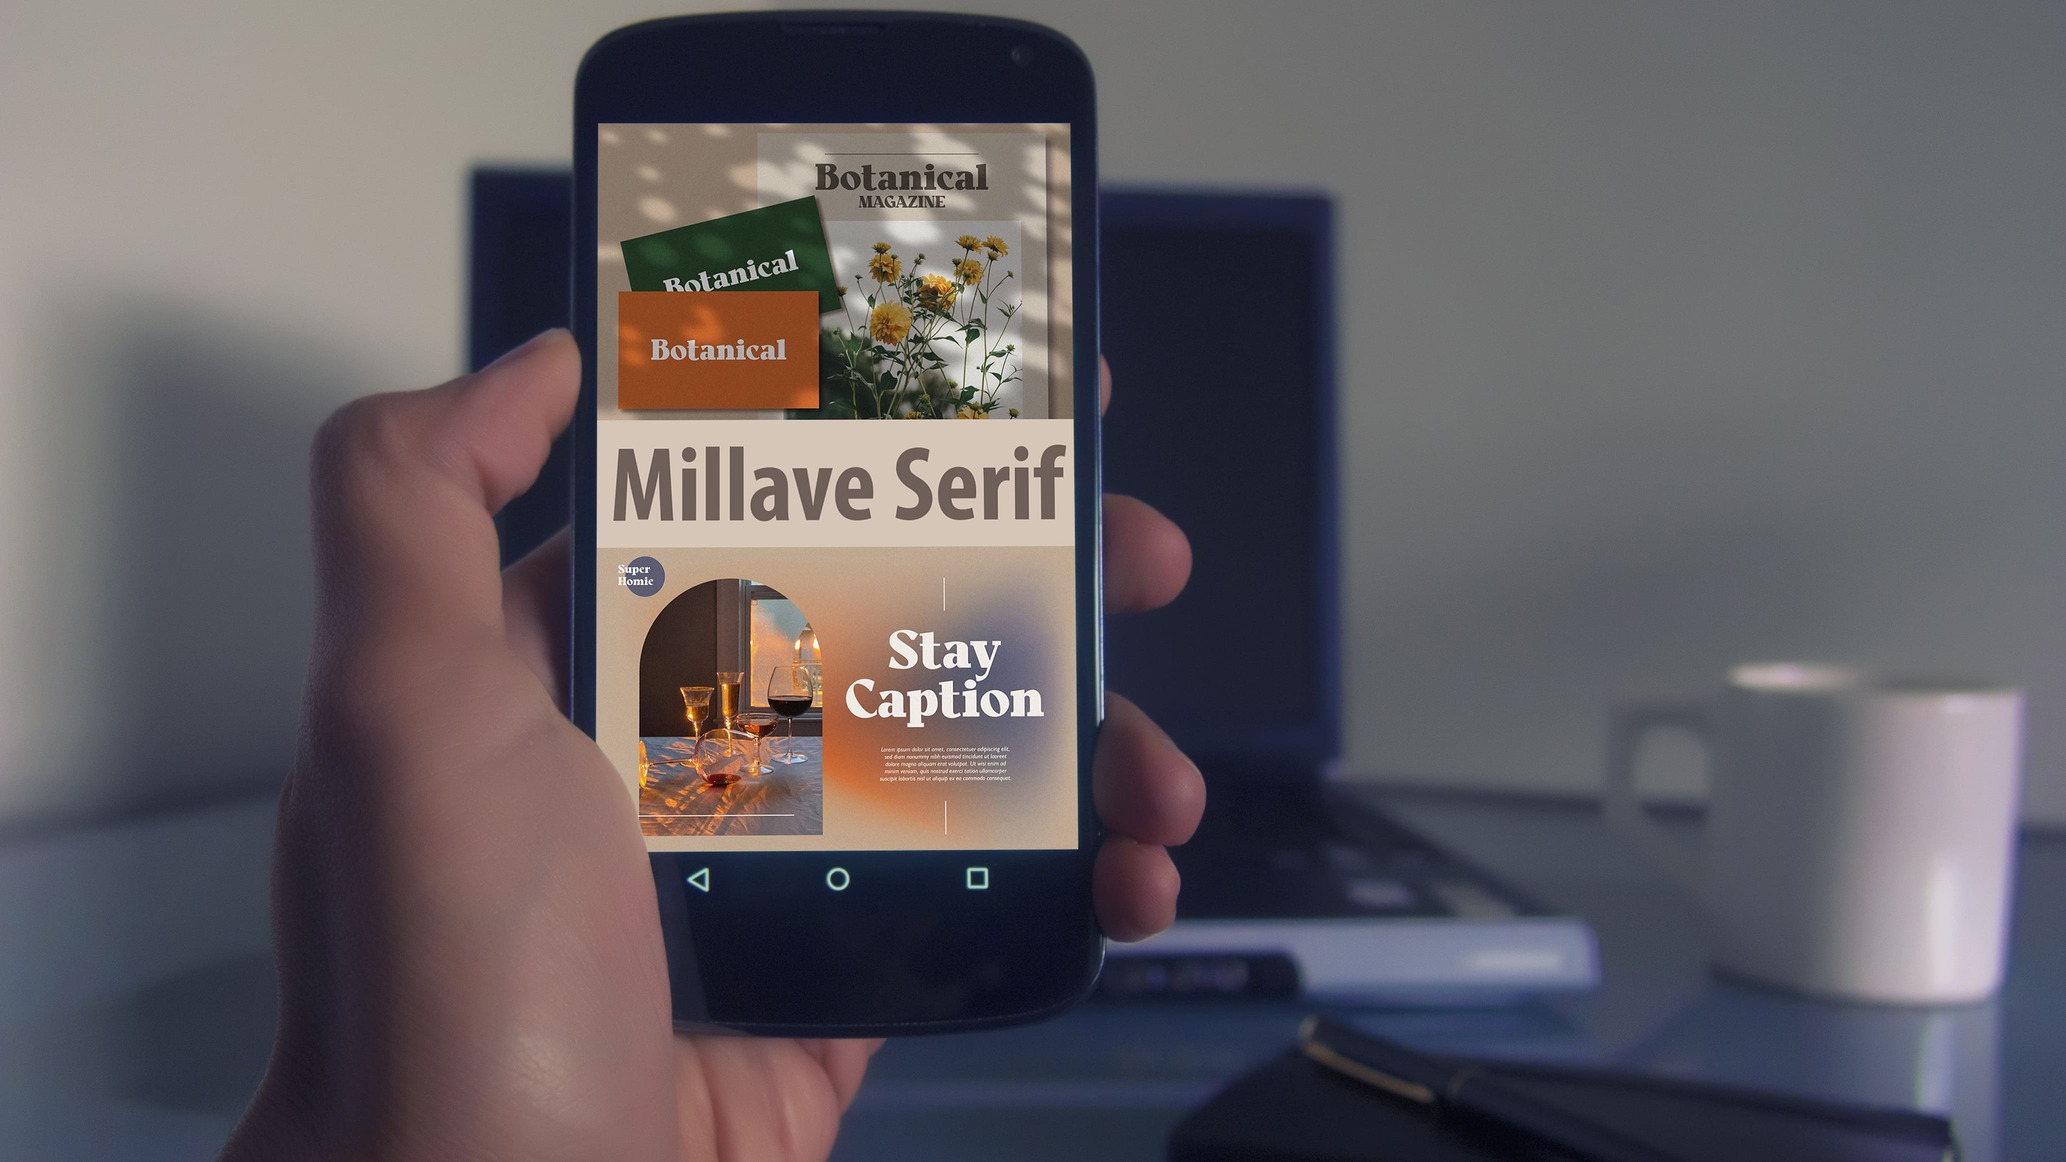 Millave Serif - "Stay Caption" On The Phone.